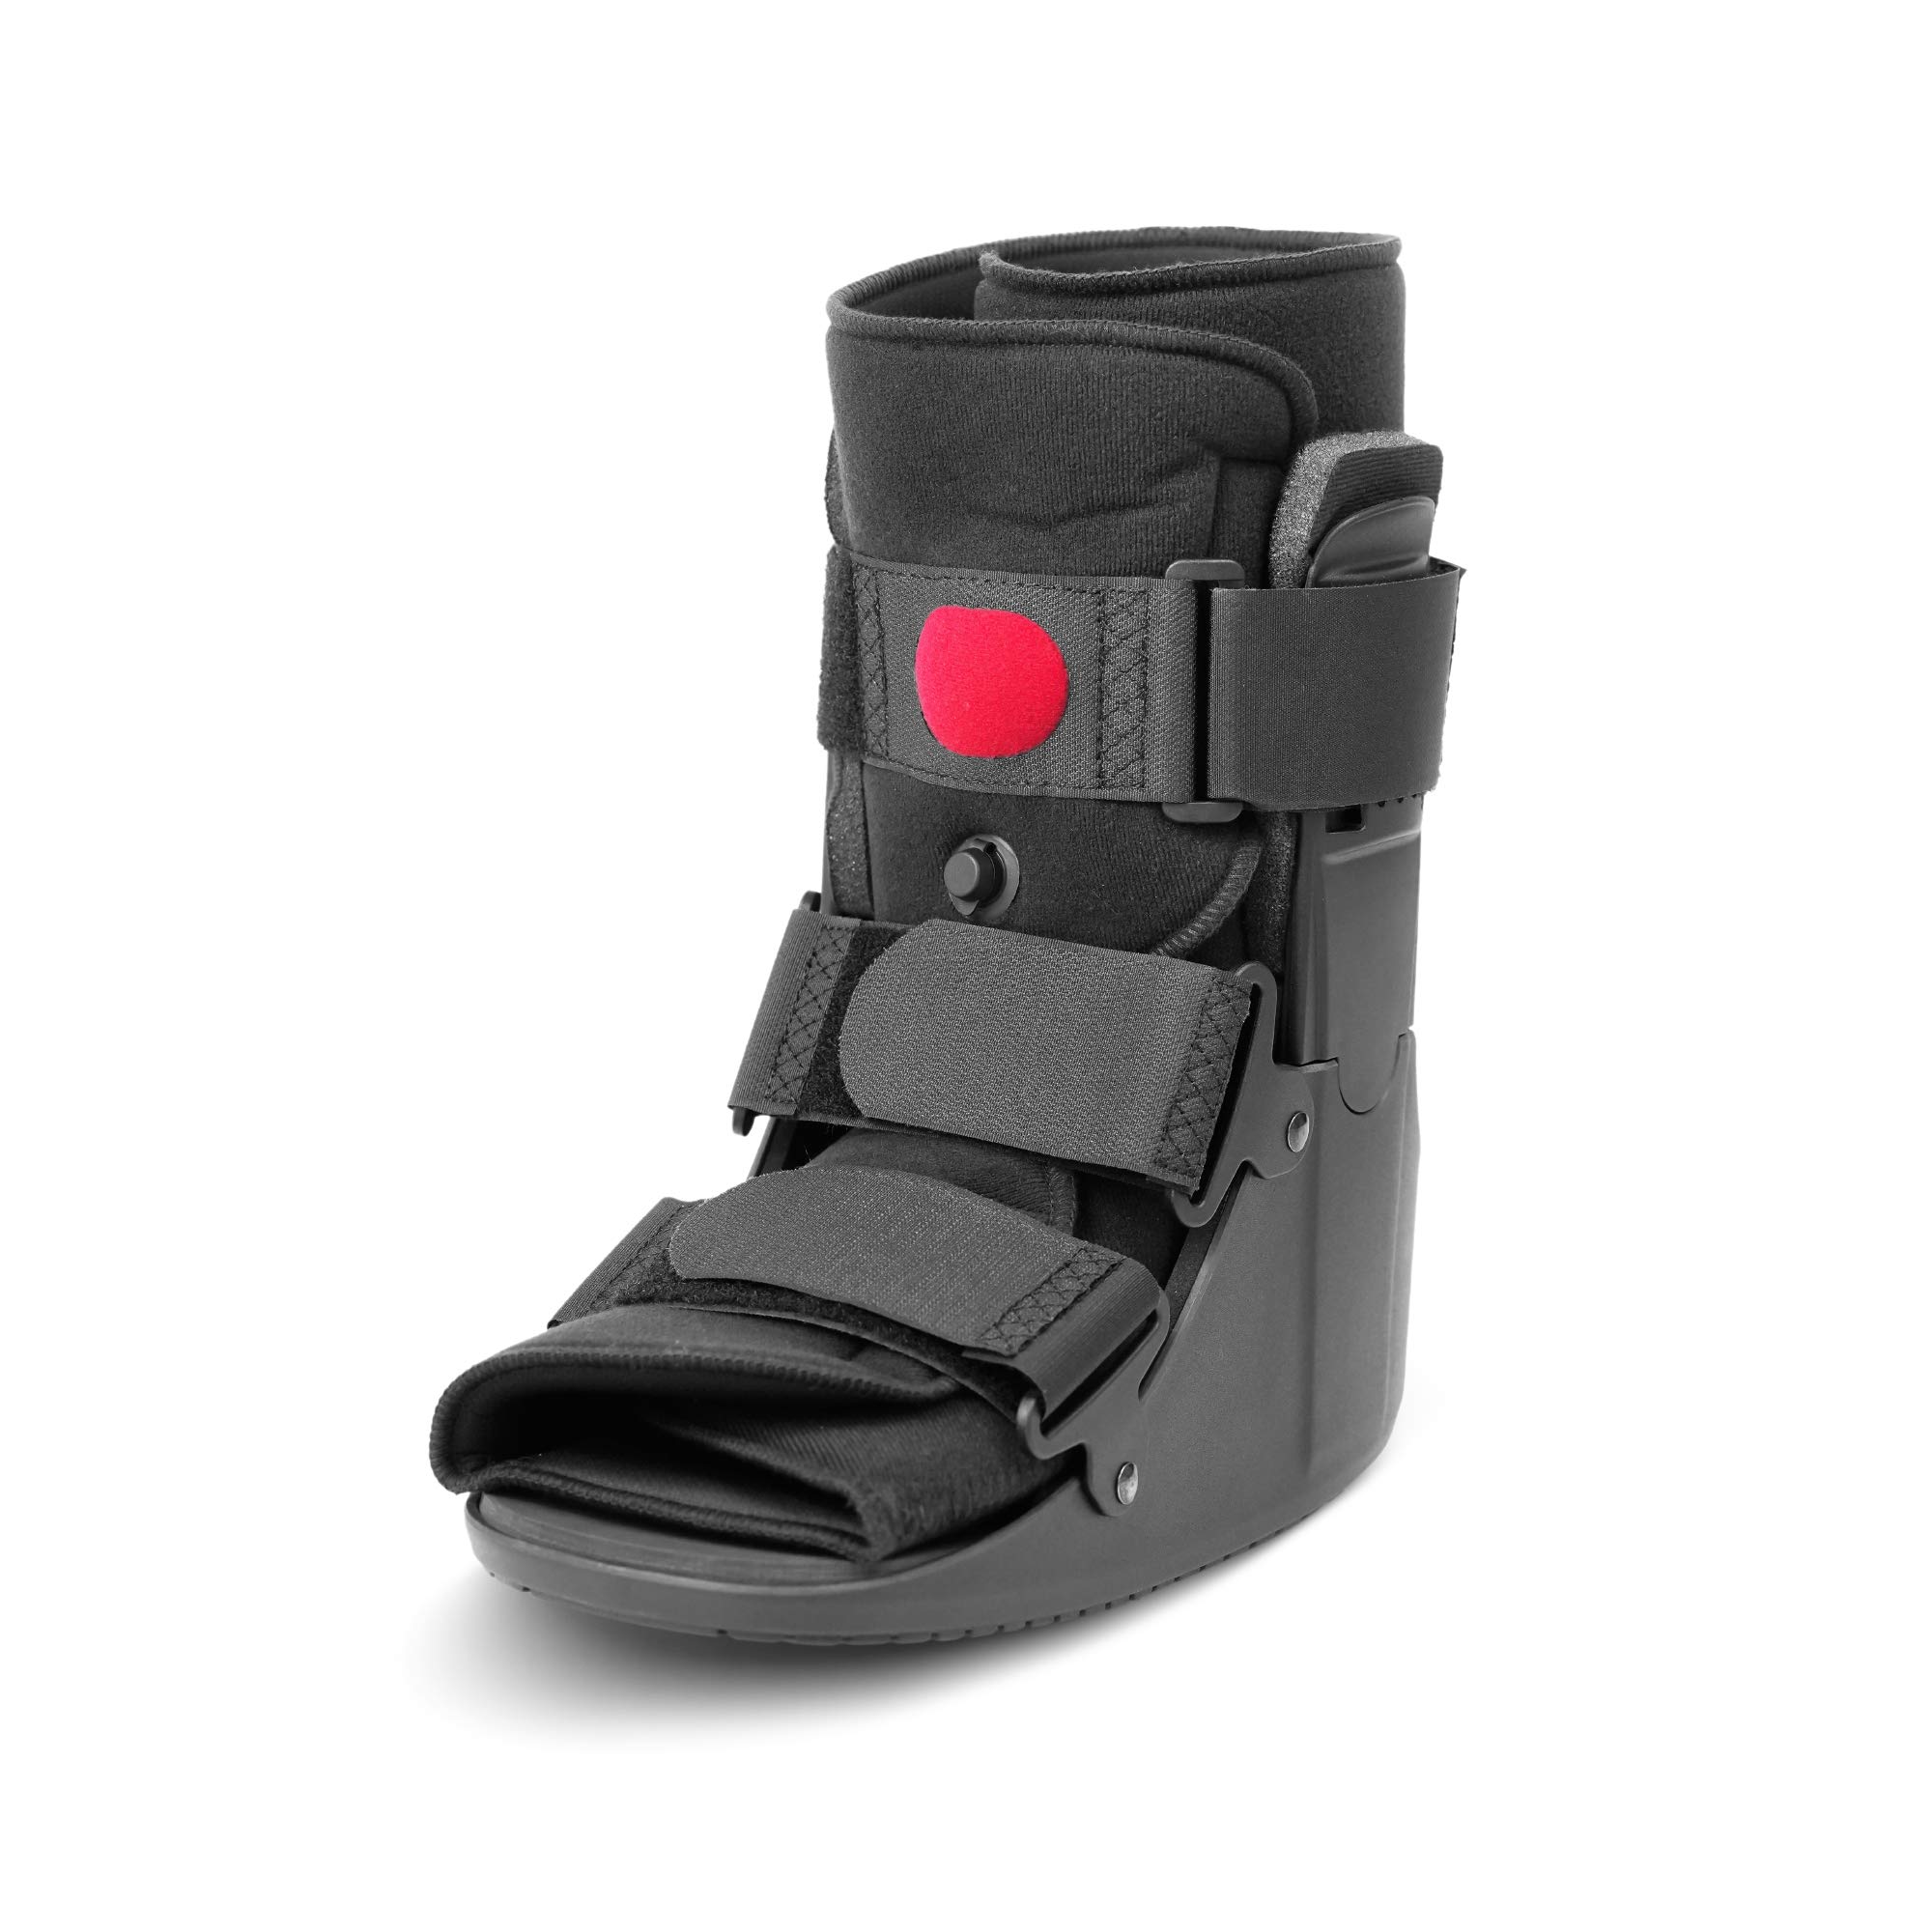 Low Top Air Walking Boot, Ankle and Foot Brace, Cam Walker Boot for Fracture, Injury, Pain, Swelling, and Post-Surgery Healing, XS - DMEforLess